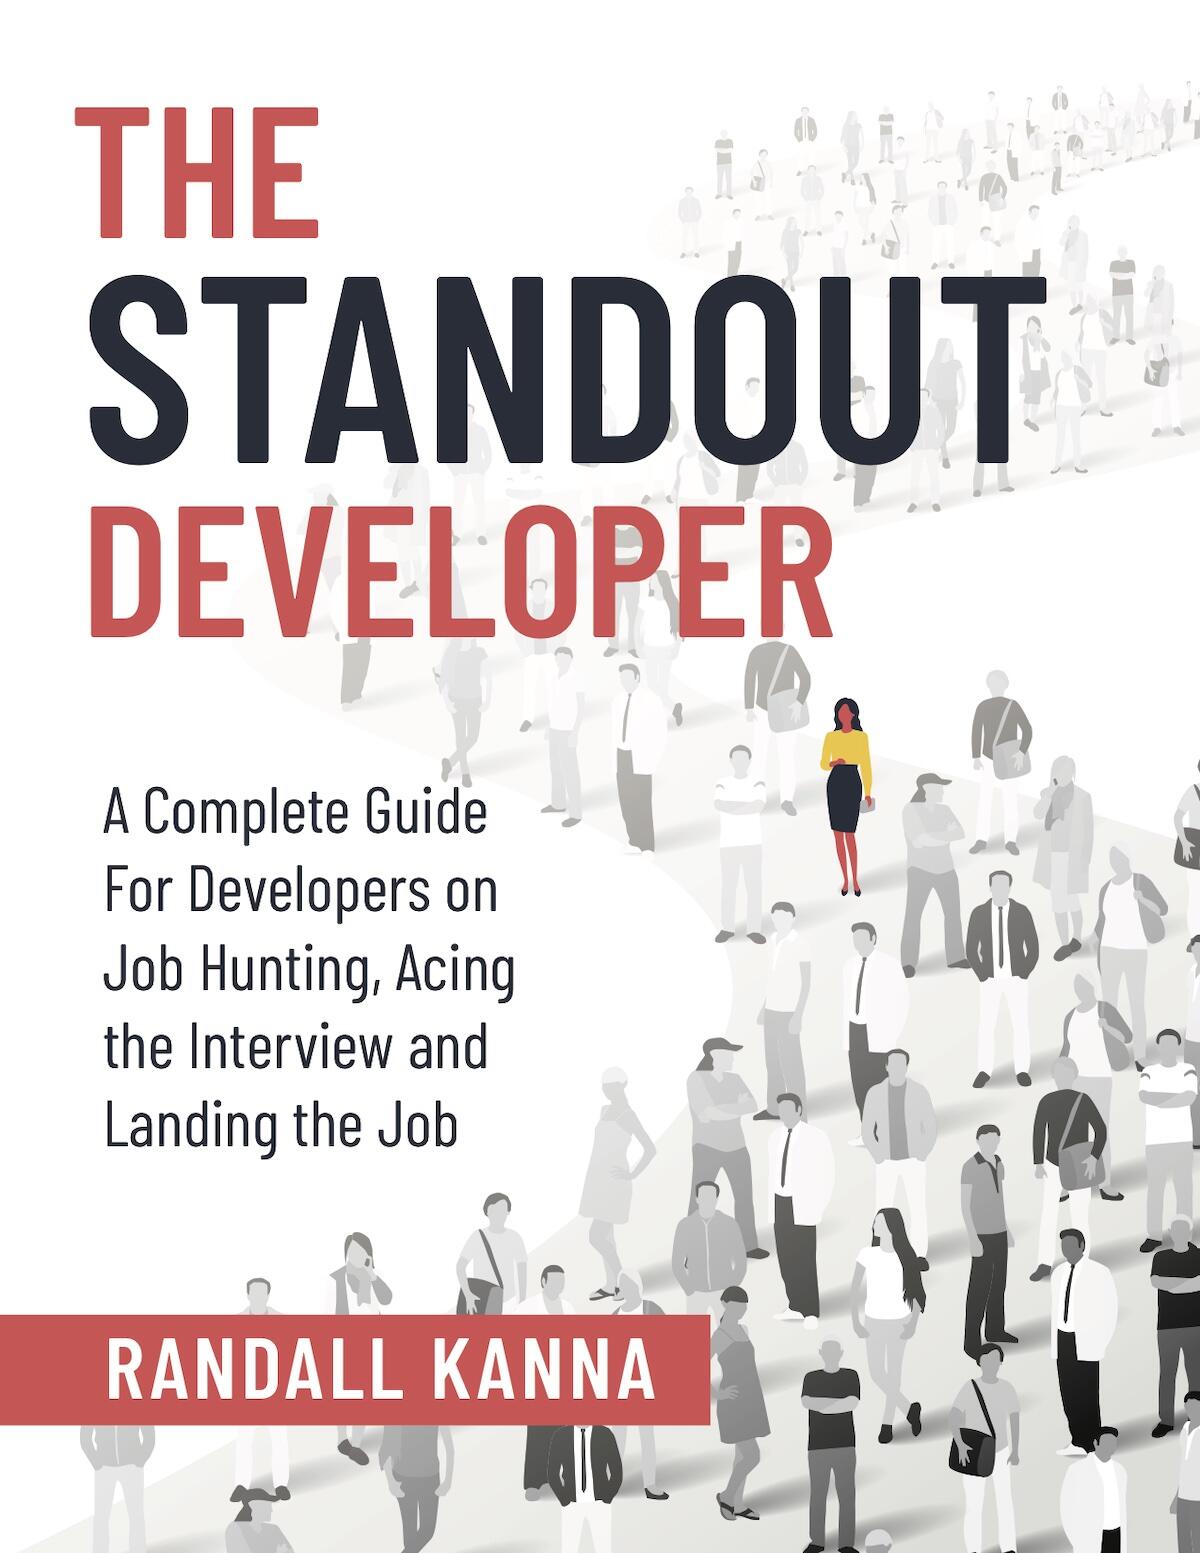 Developer career 101: How to stand out in the field of software development and engineering